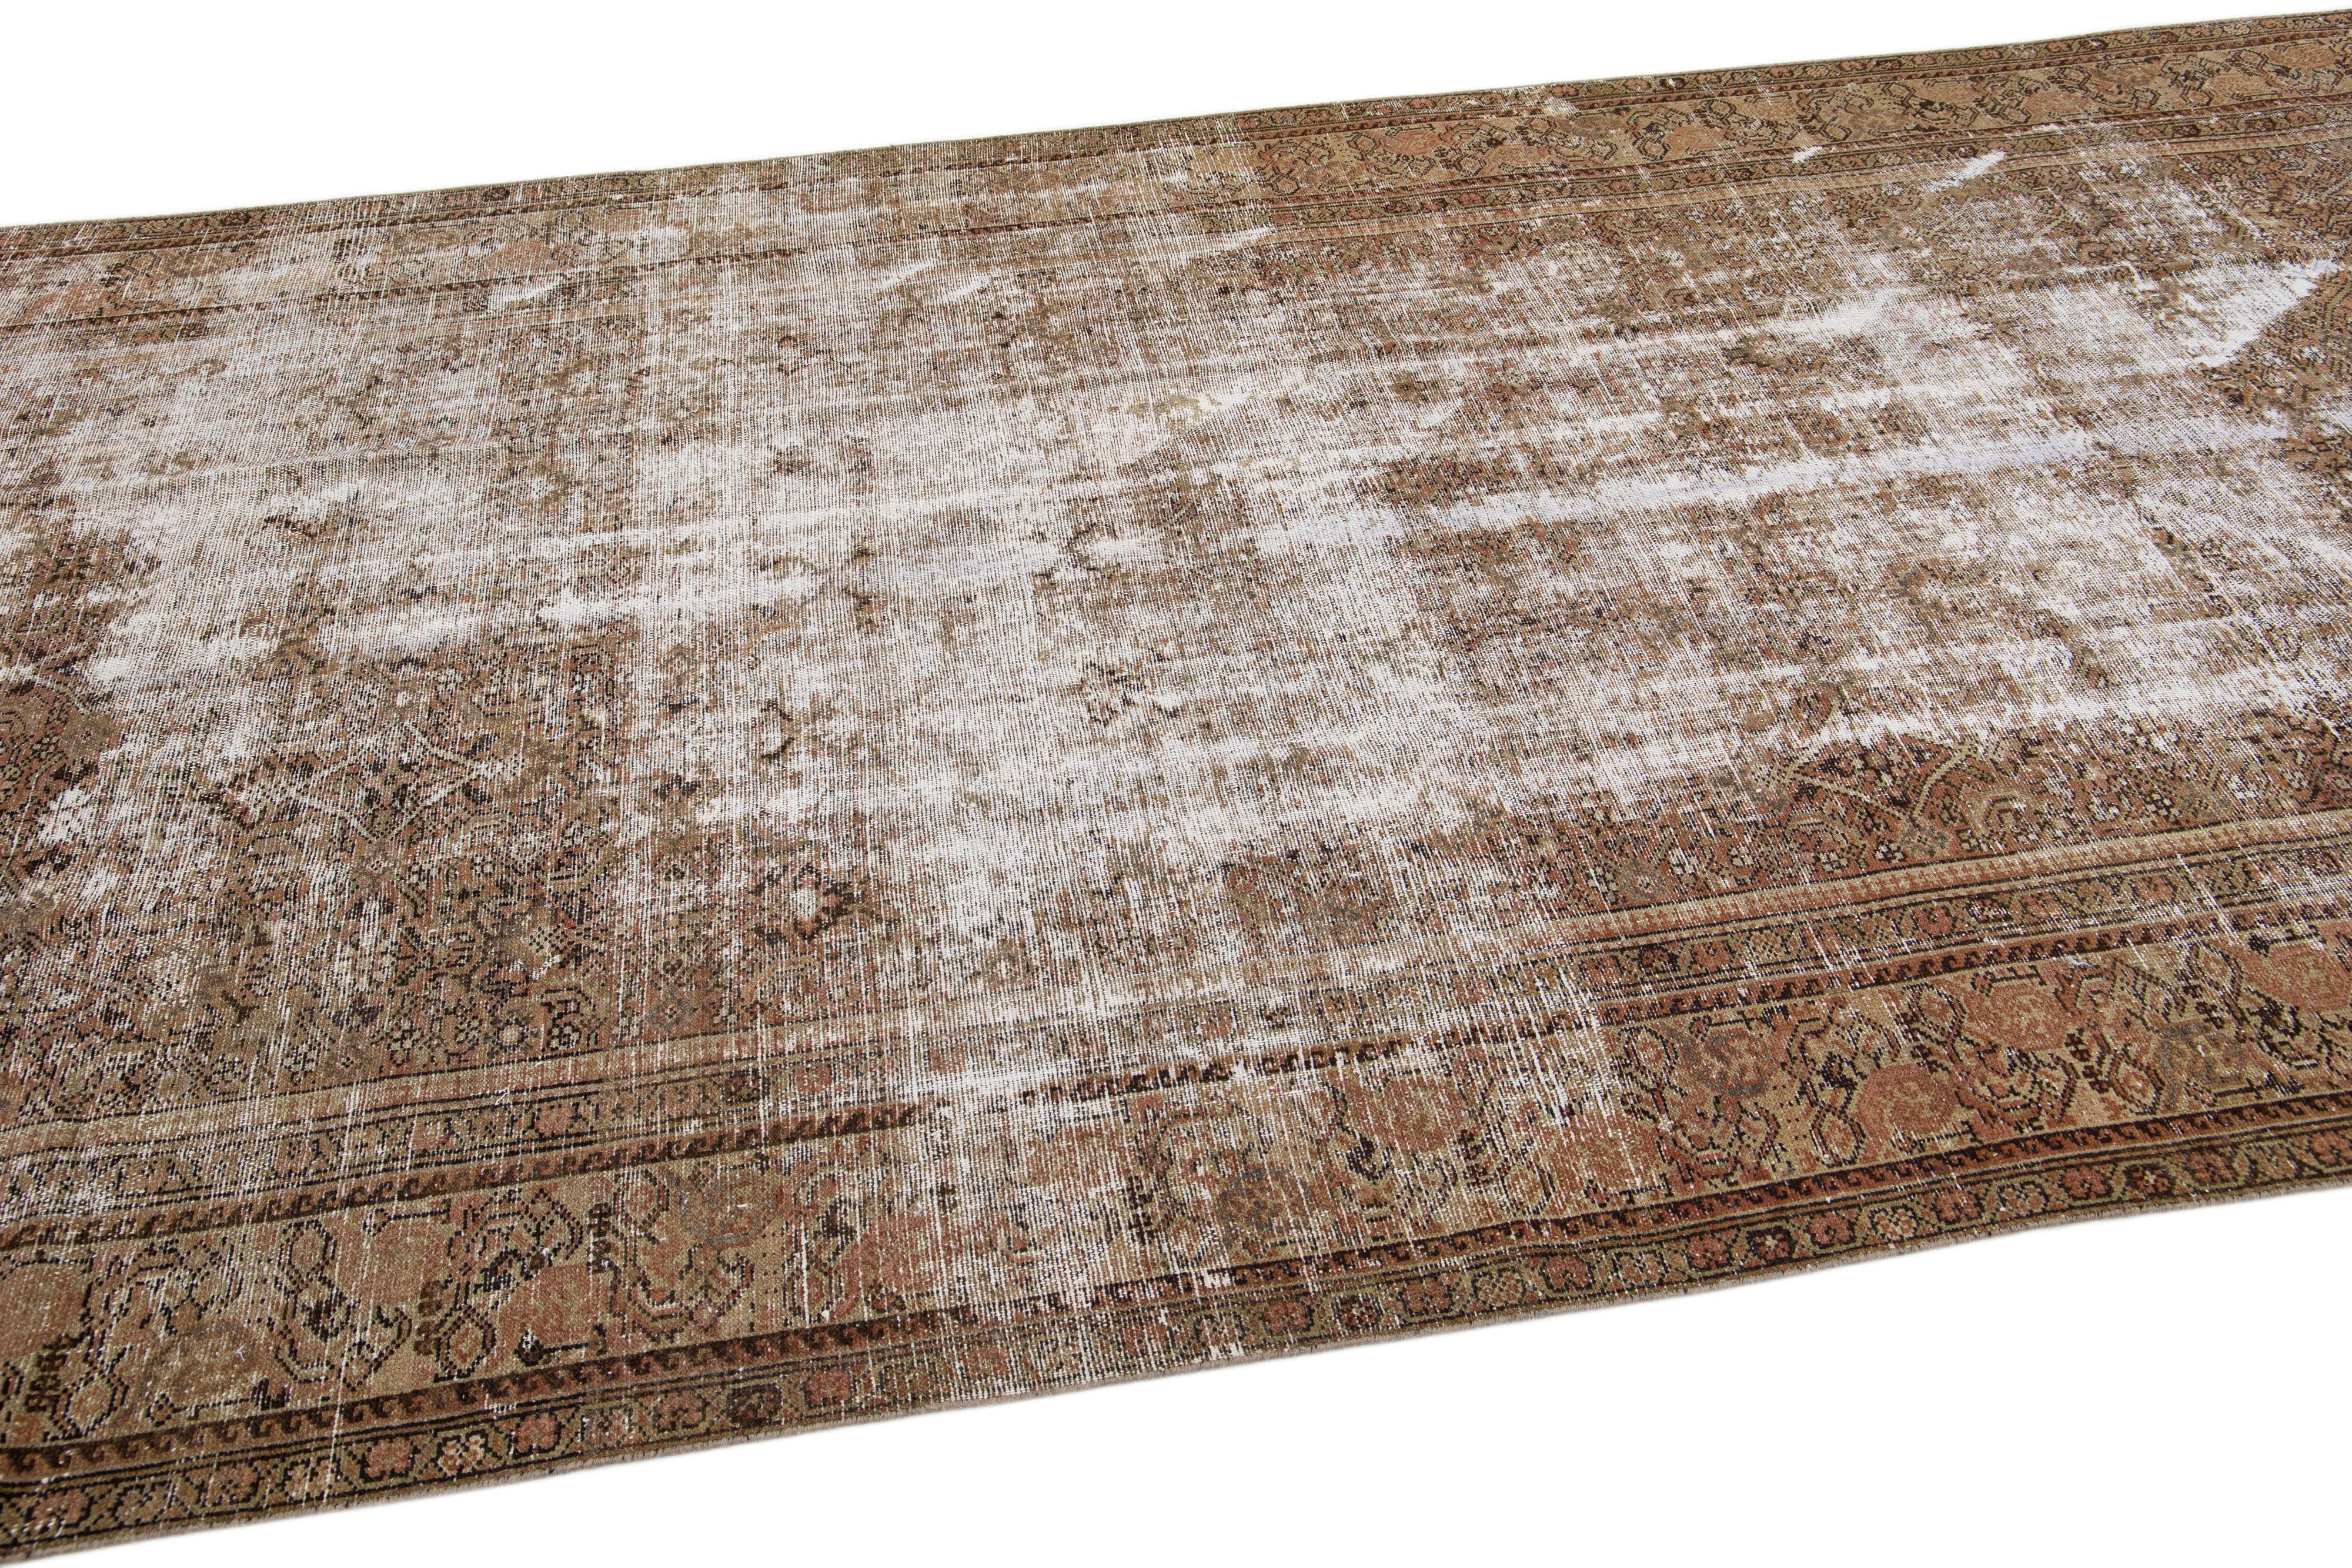 Antique Hamadan Handmade Distresses Brown Wool Rug with Allover Design In Good Condition For Sale In Norwalk, CT